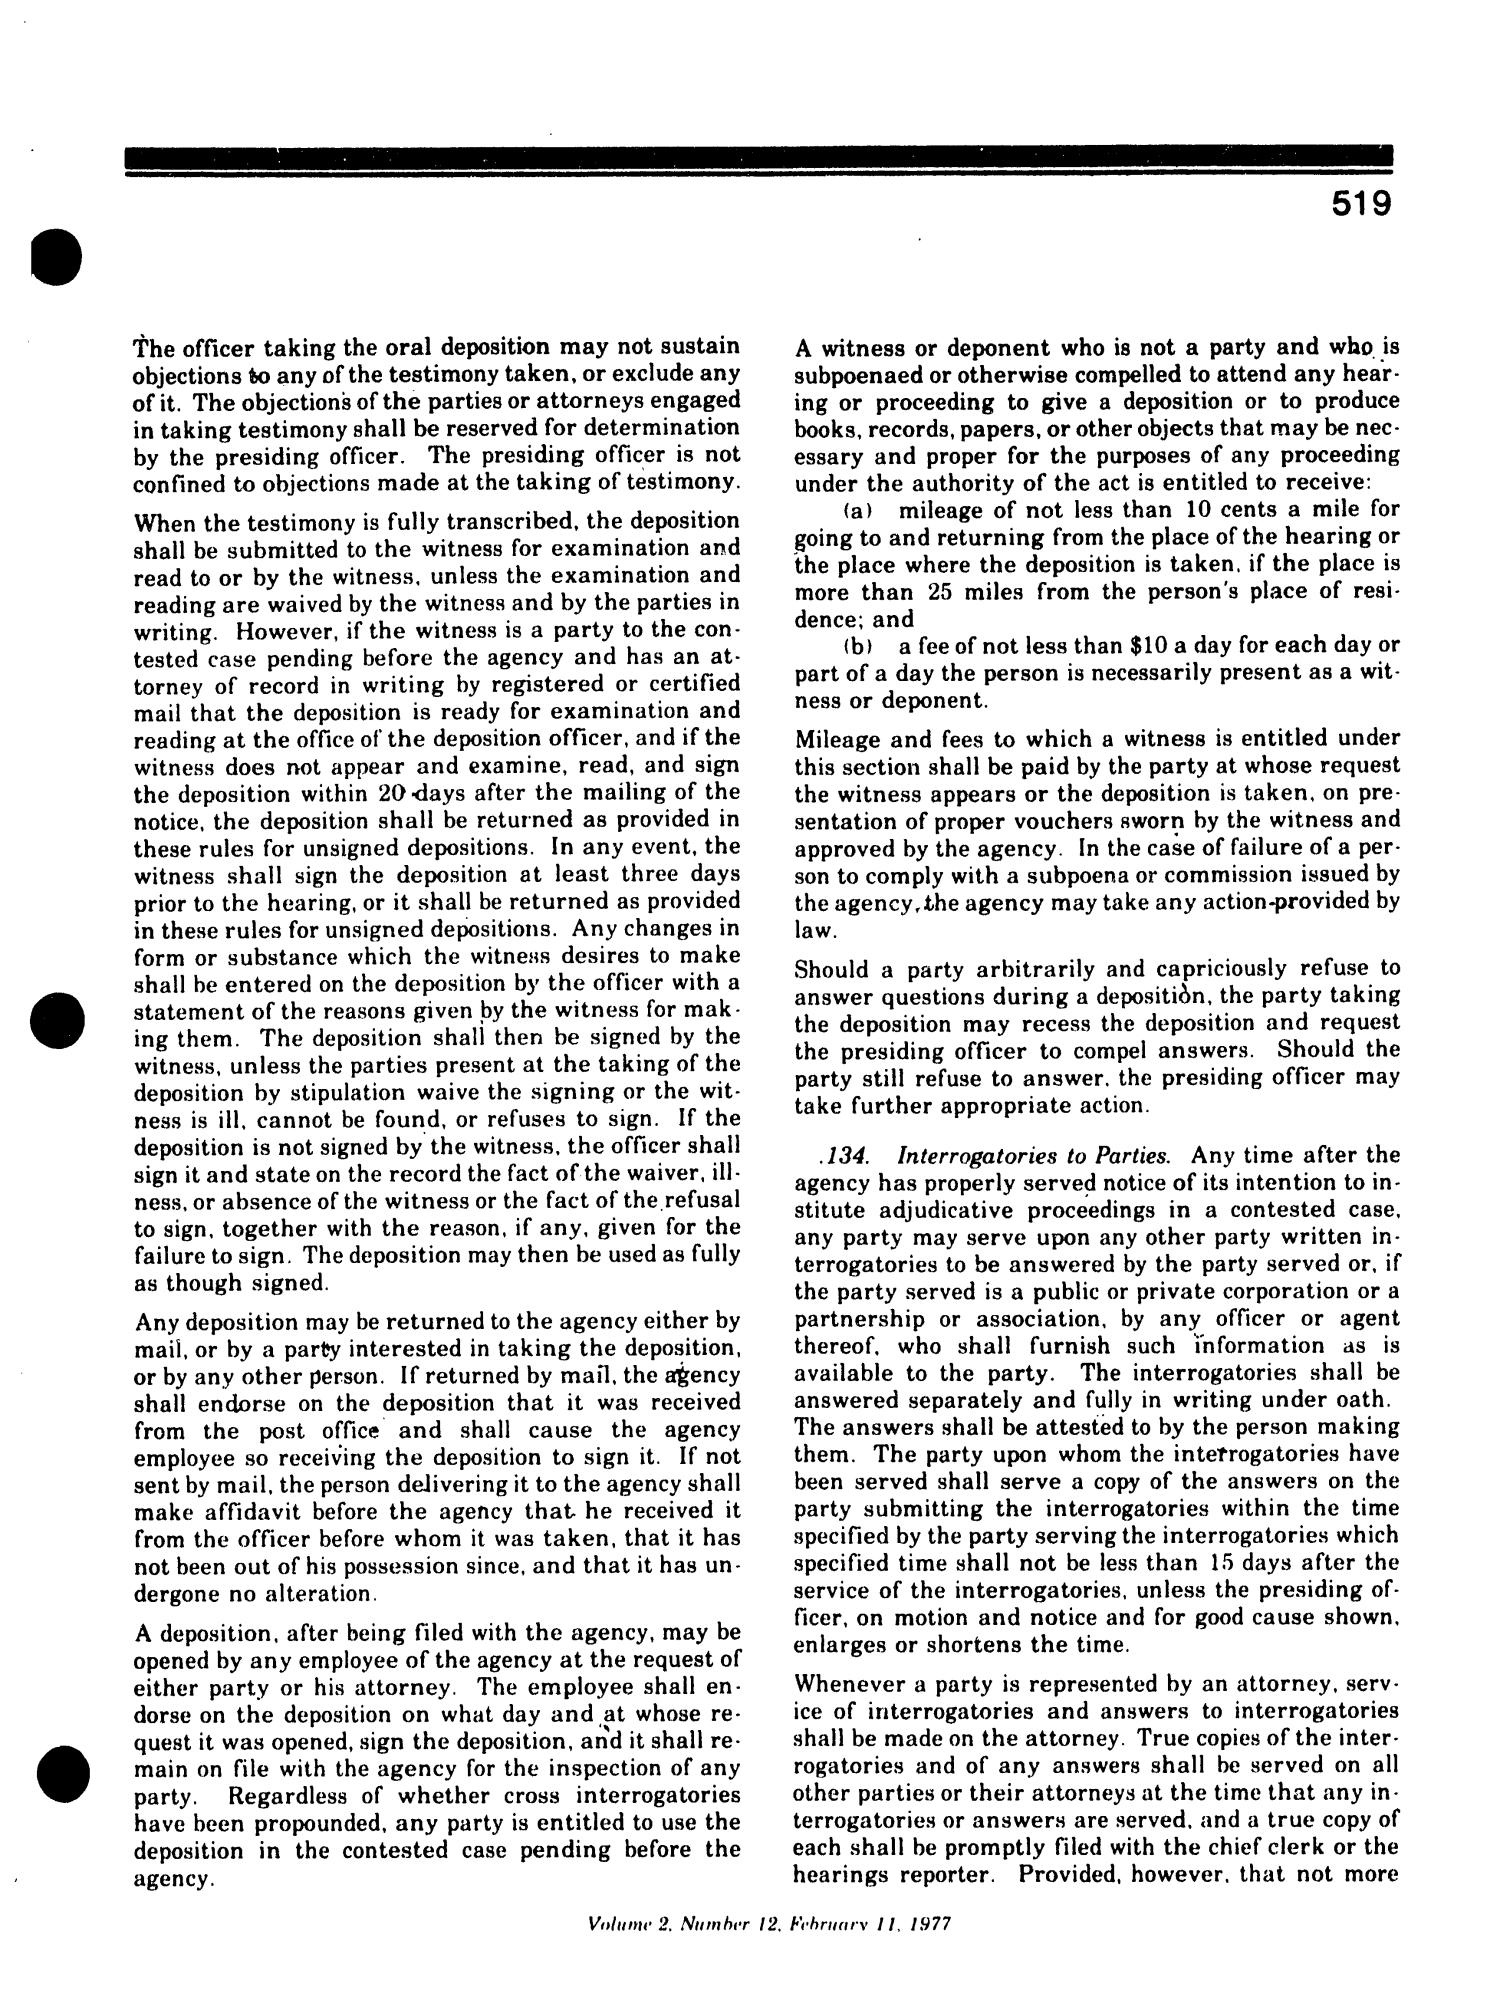 Texas Register, Volume 2, Number 12, Pages 507-562, February 11, 1977
                                                
                                                    519
                                                